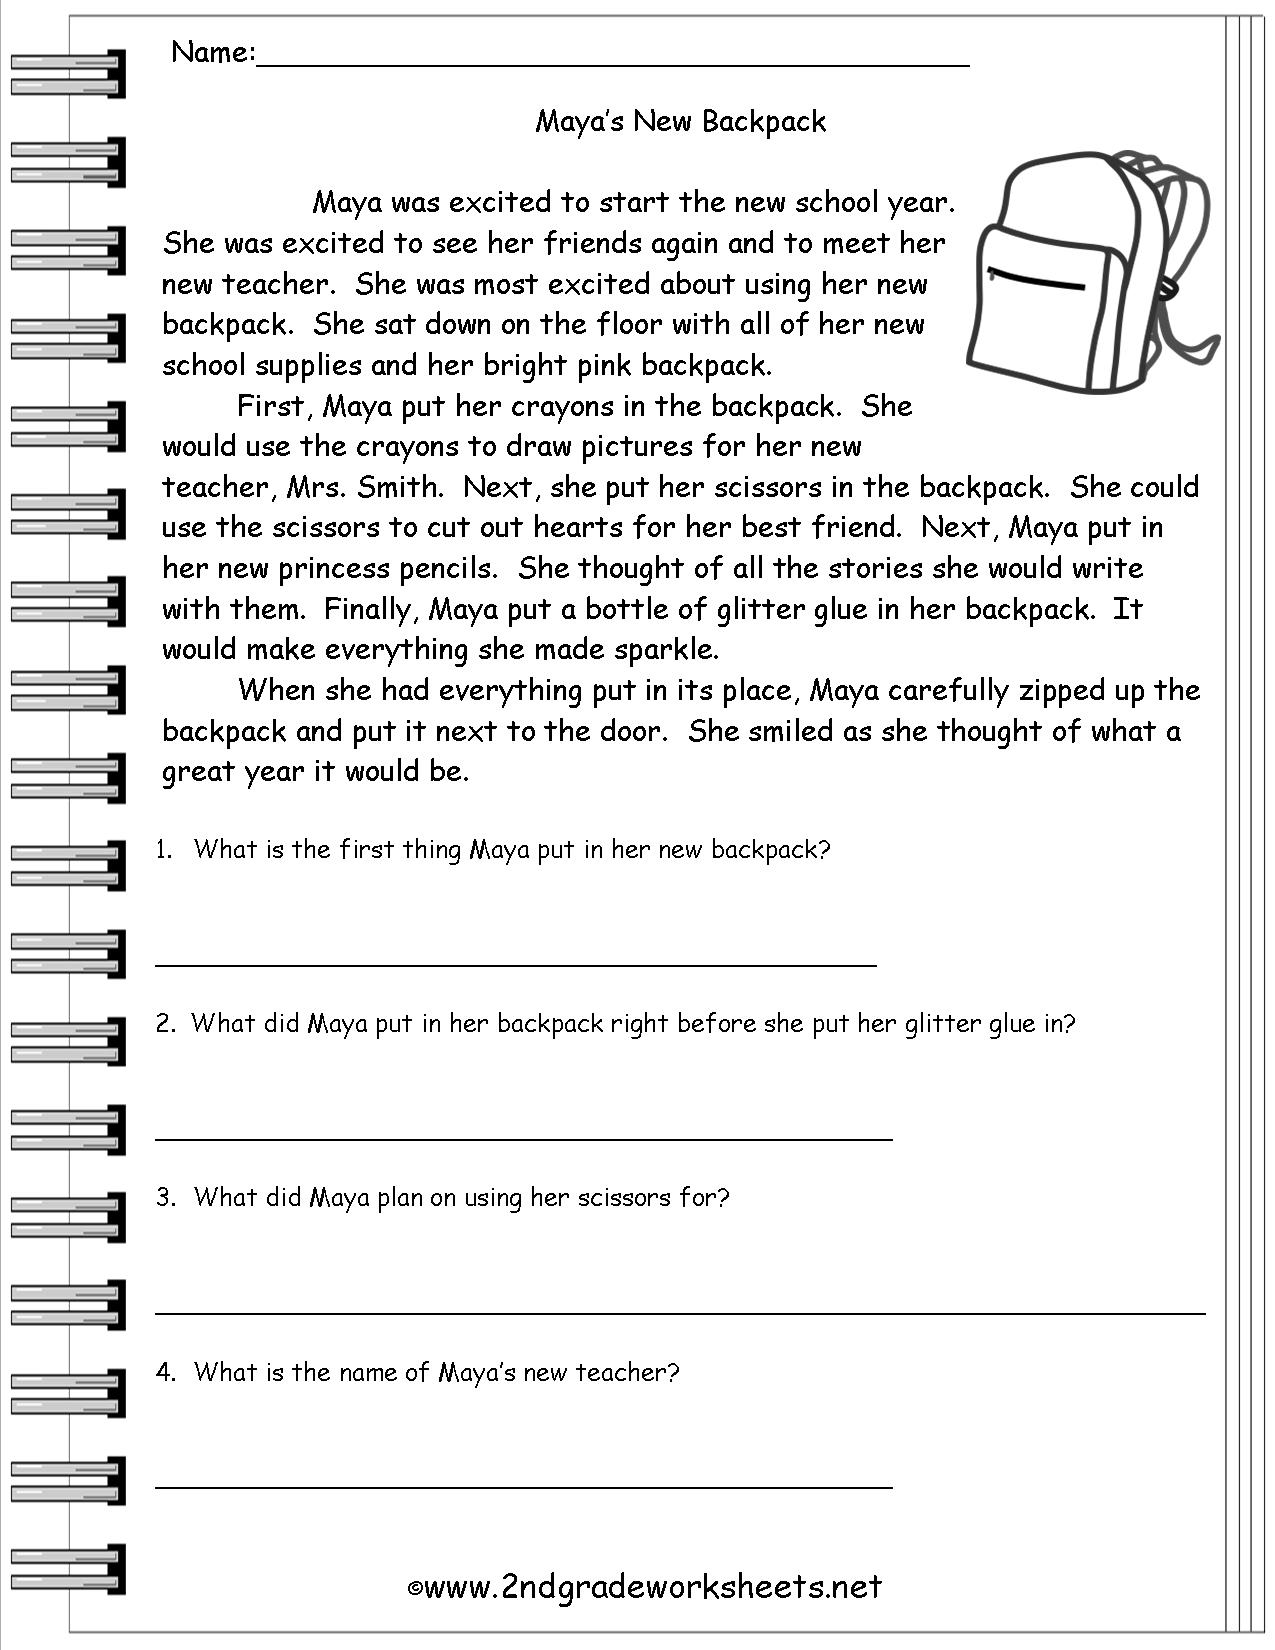 7 Best Images of Writing 4th Grade Reading Worksheets ...